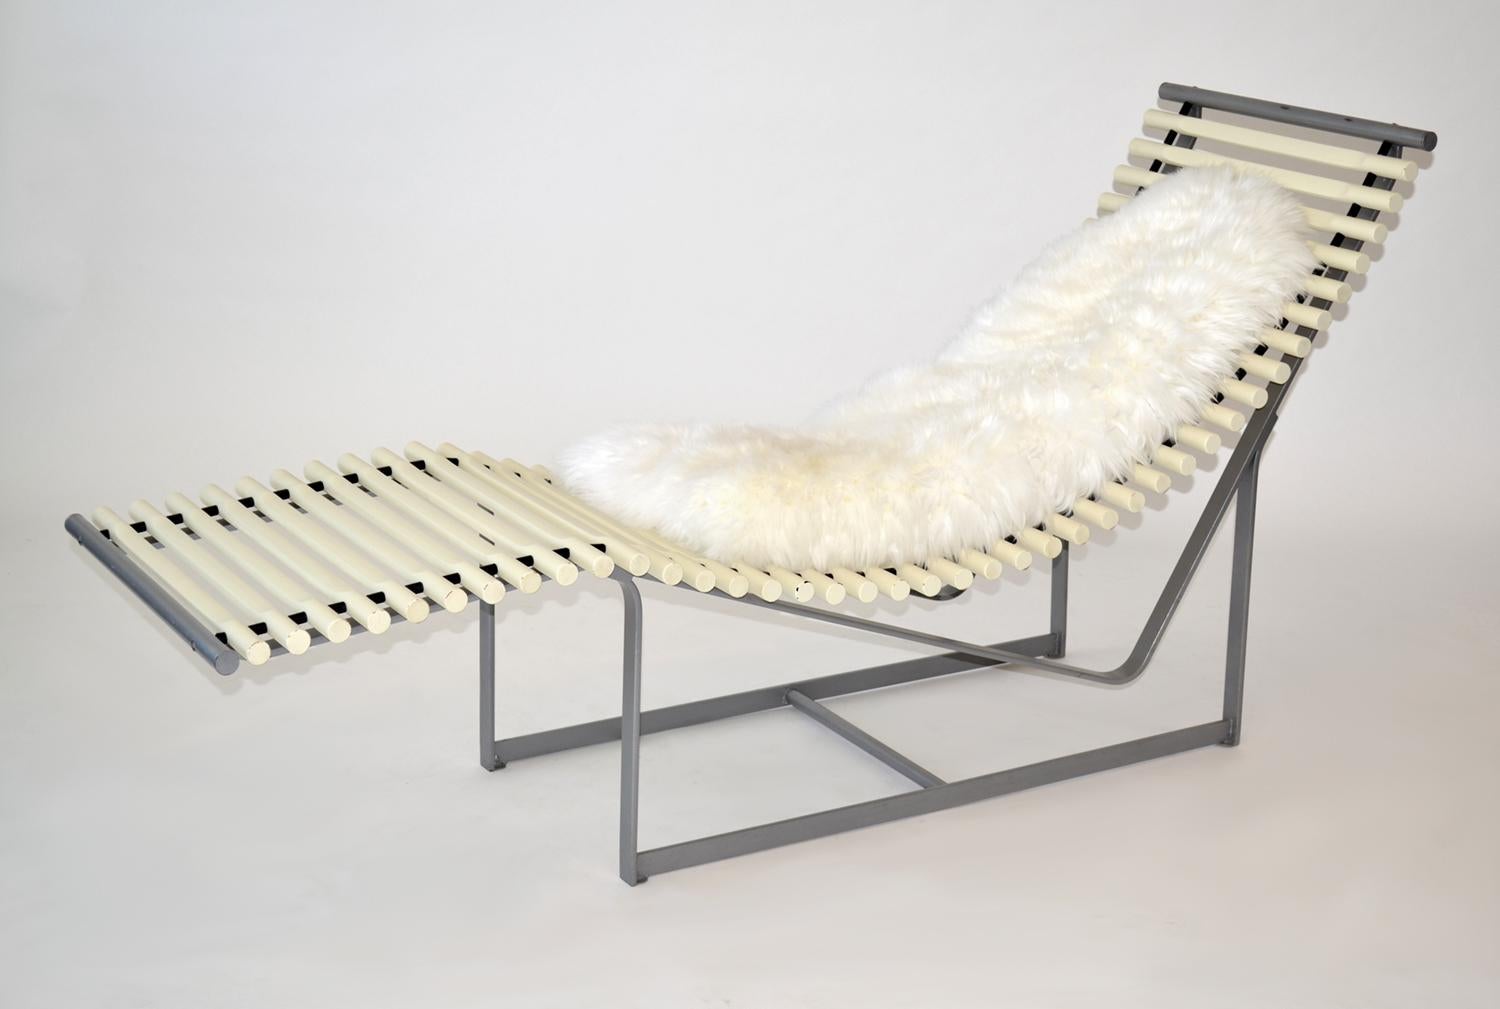 Pair of Peter Strassl Spine Back Lounge Chairs or Chaises, Germany, 1978 For Sale 3